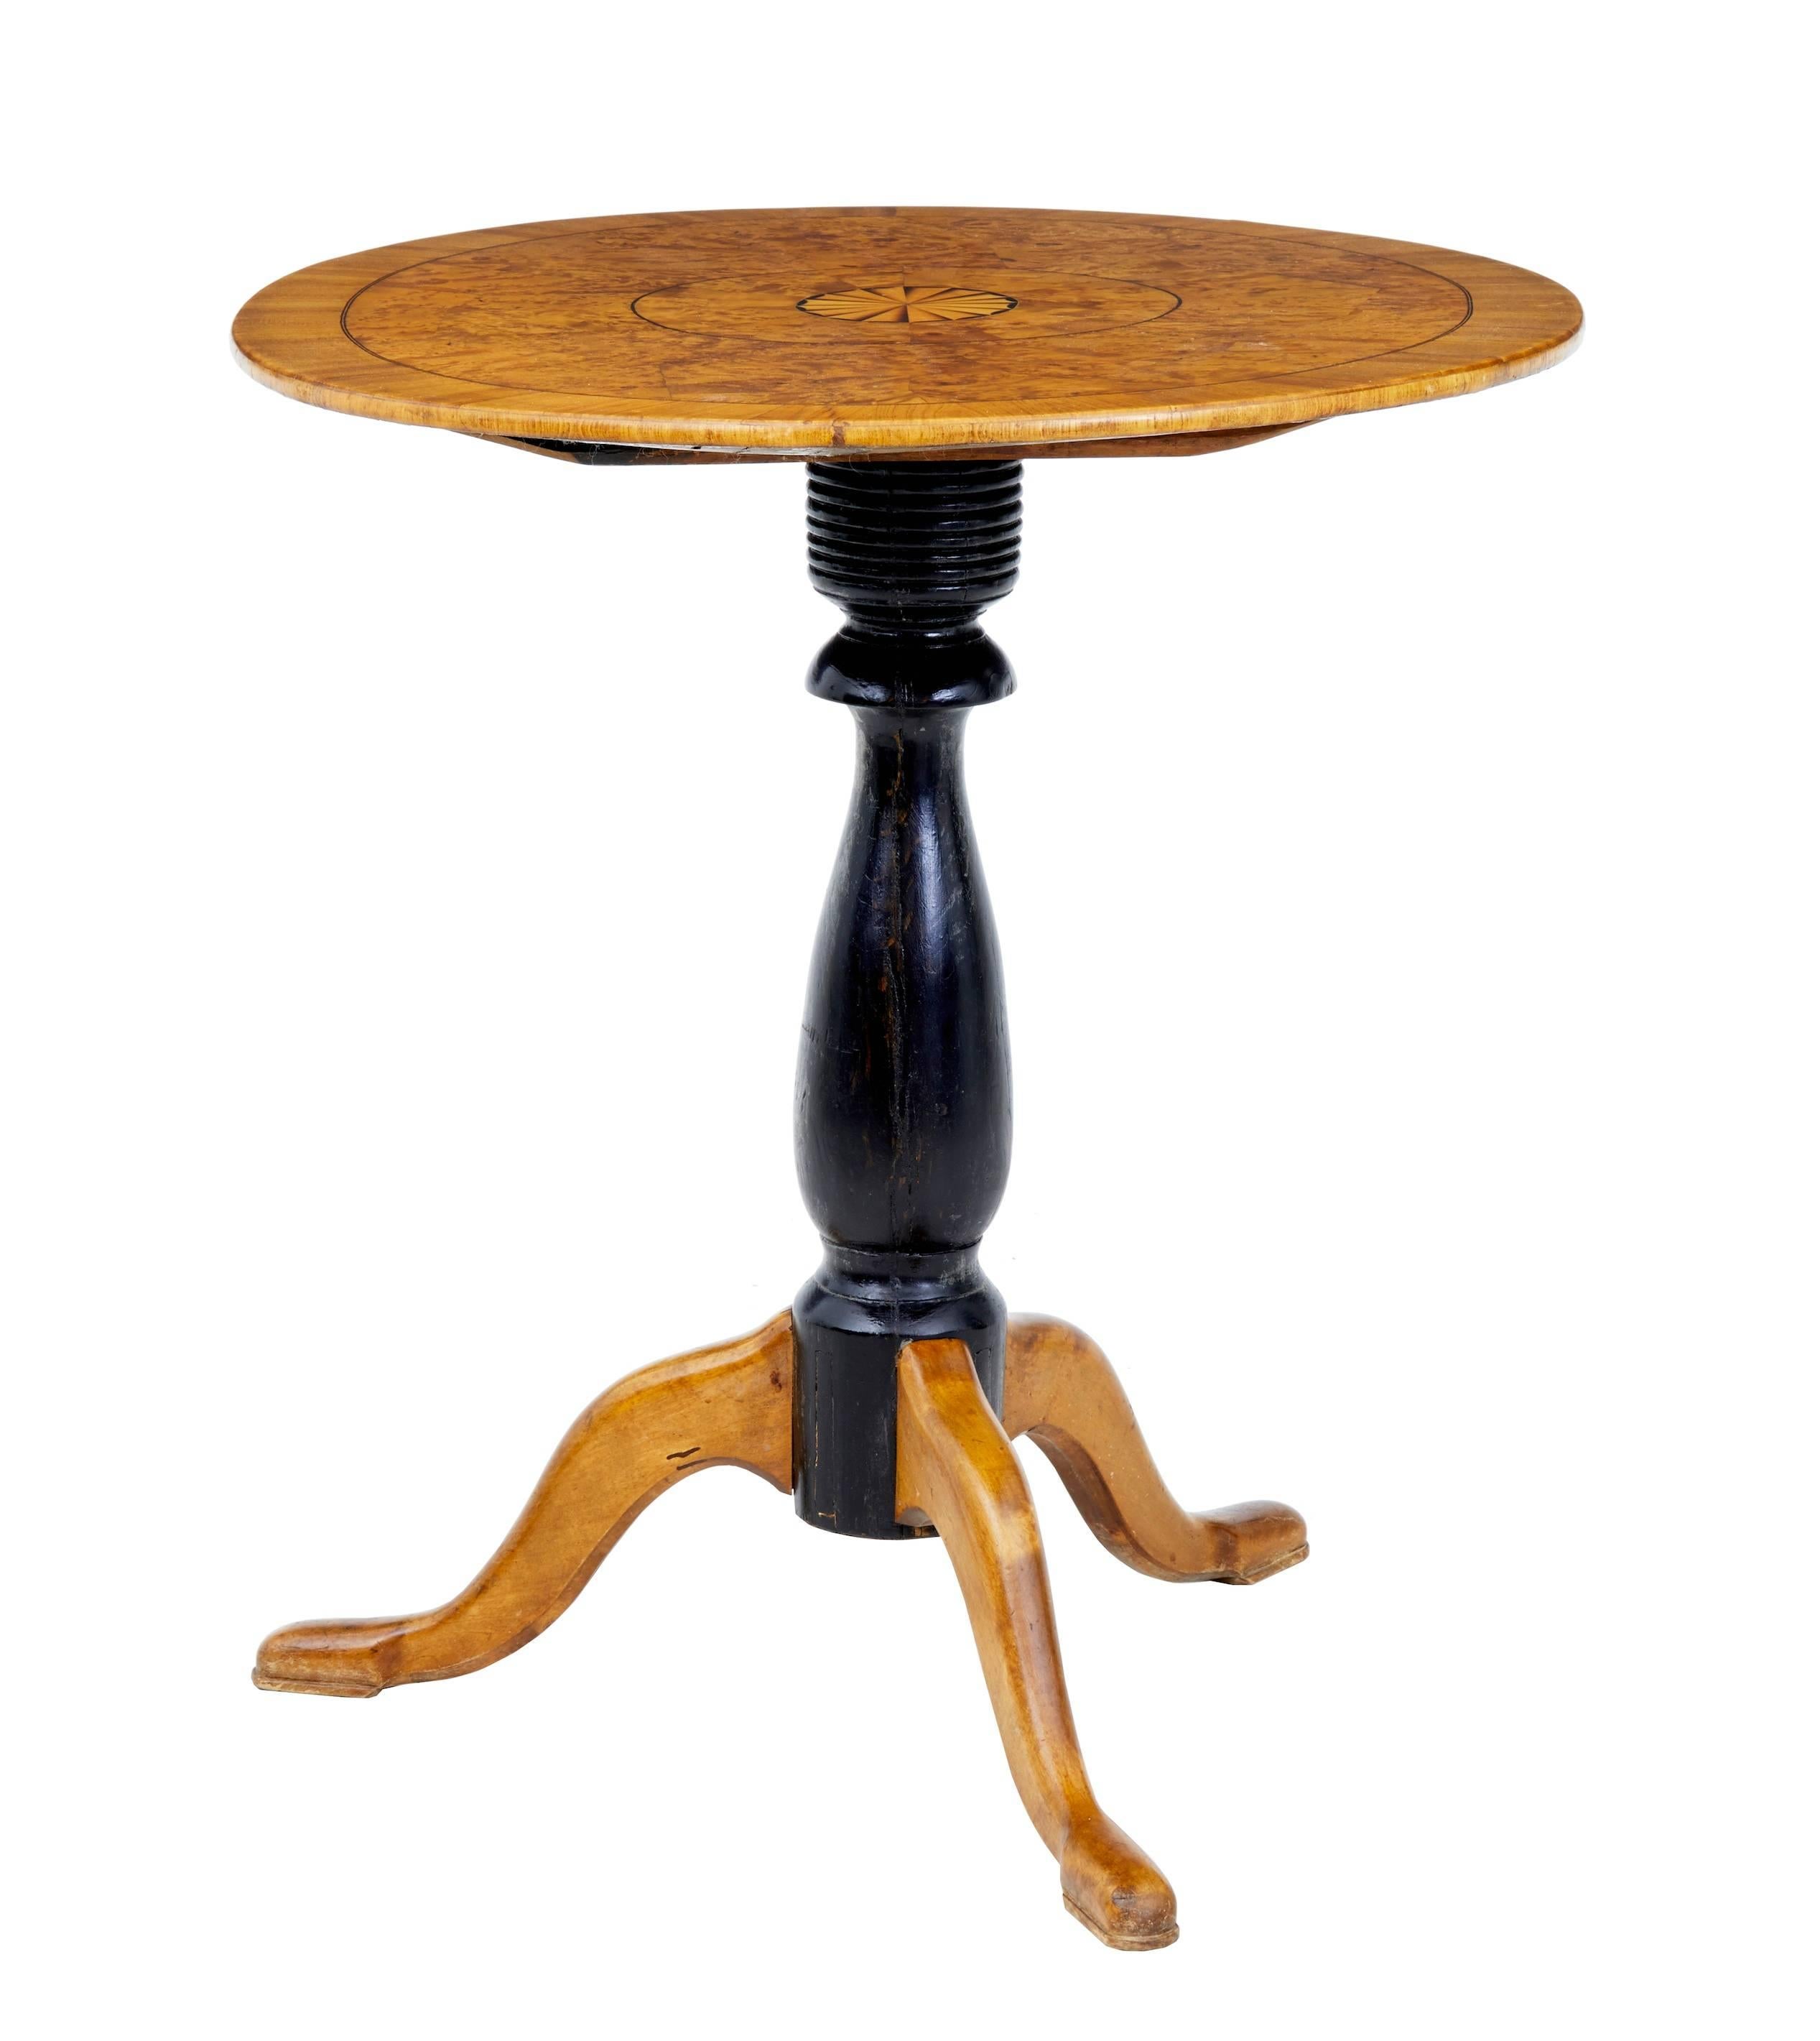 Fine quality elm root oval table, circa 1860.
Beautifully inlaid top with stringing and inlay.
Rich and vibrant in color.
Standing on a ebonized tripod base, terminating on pad foot.

Measures: Height 28 1/2